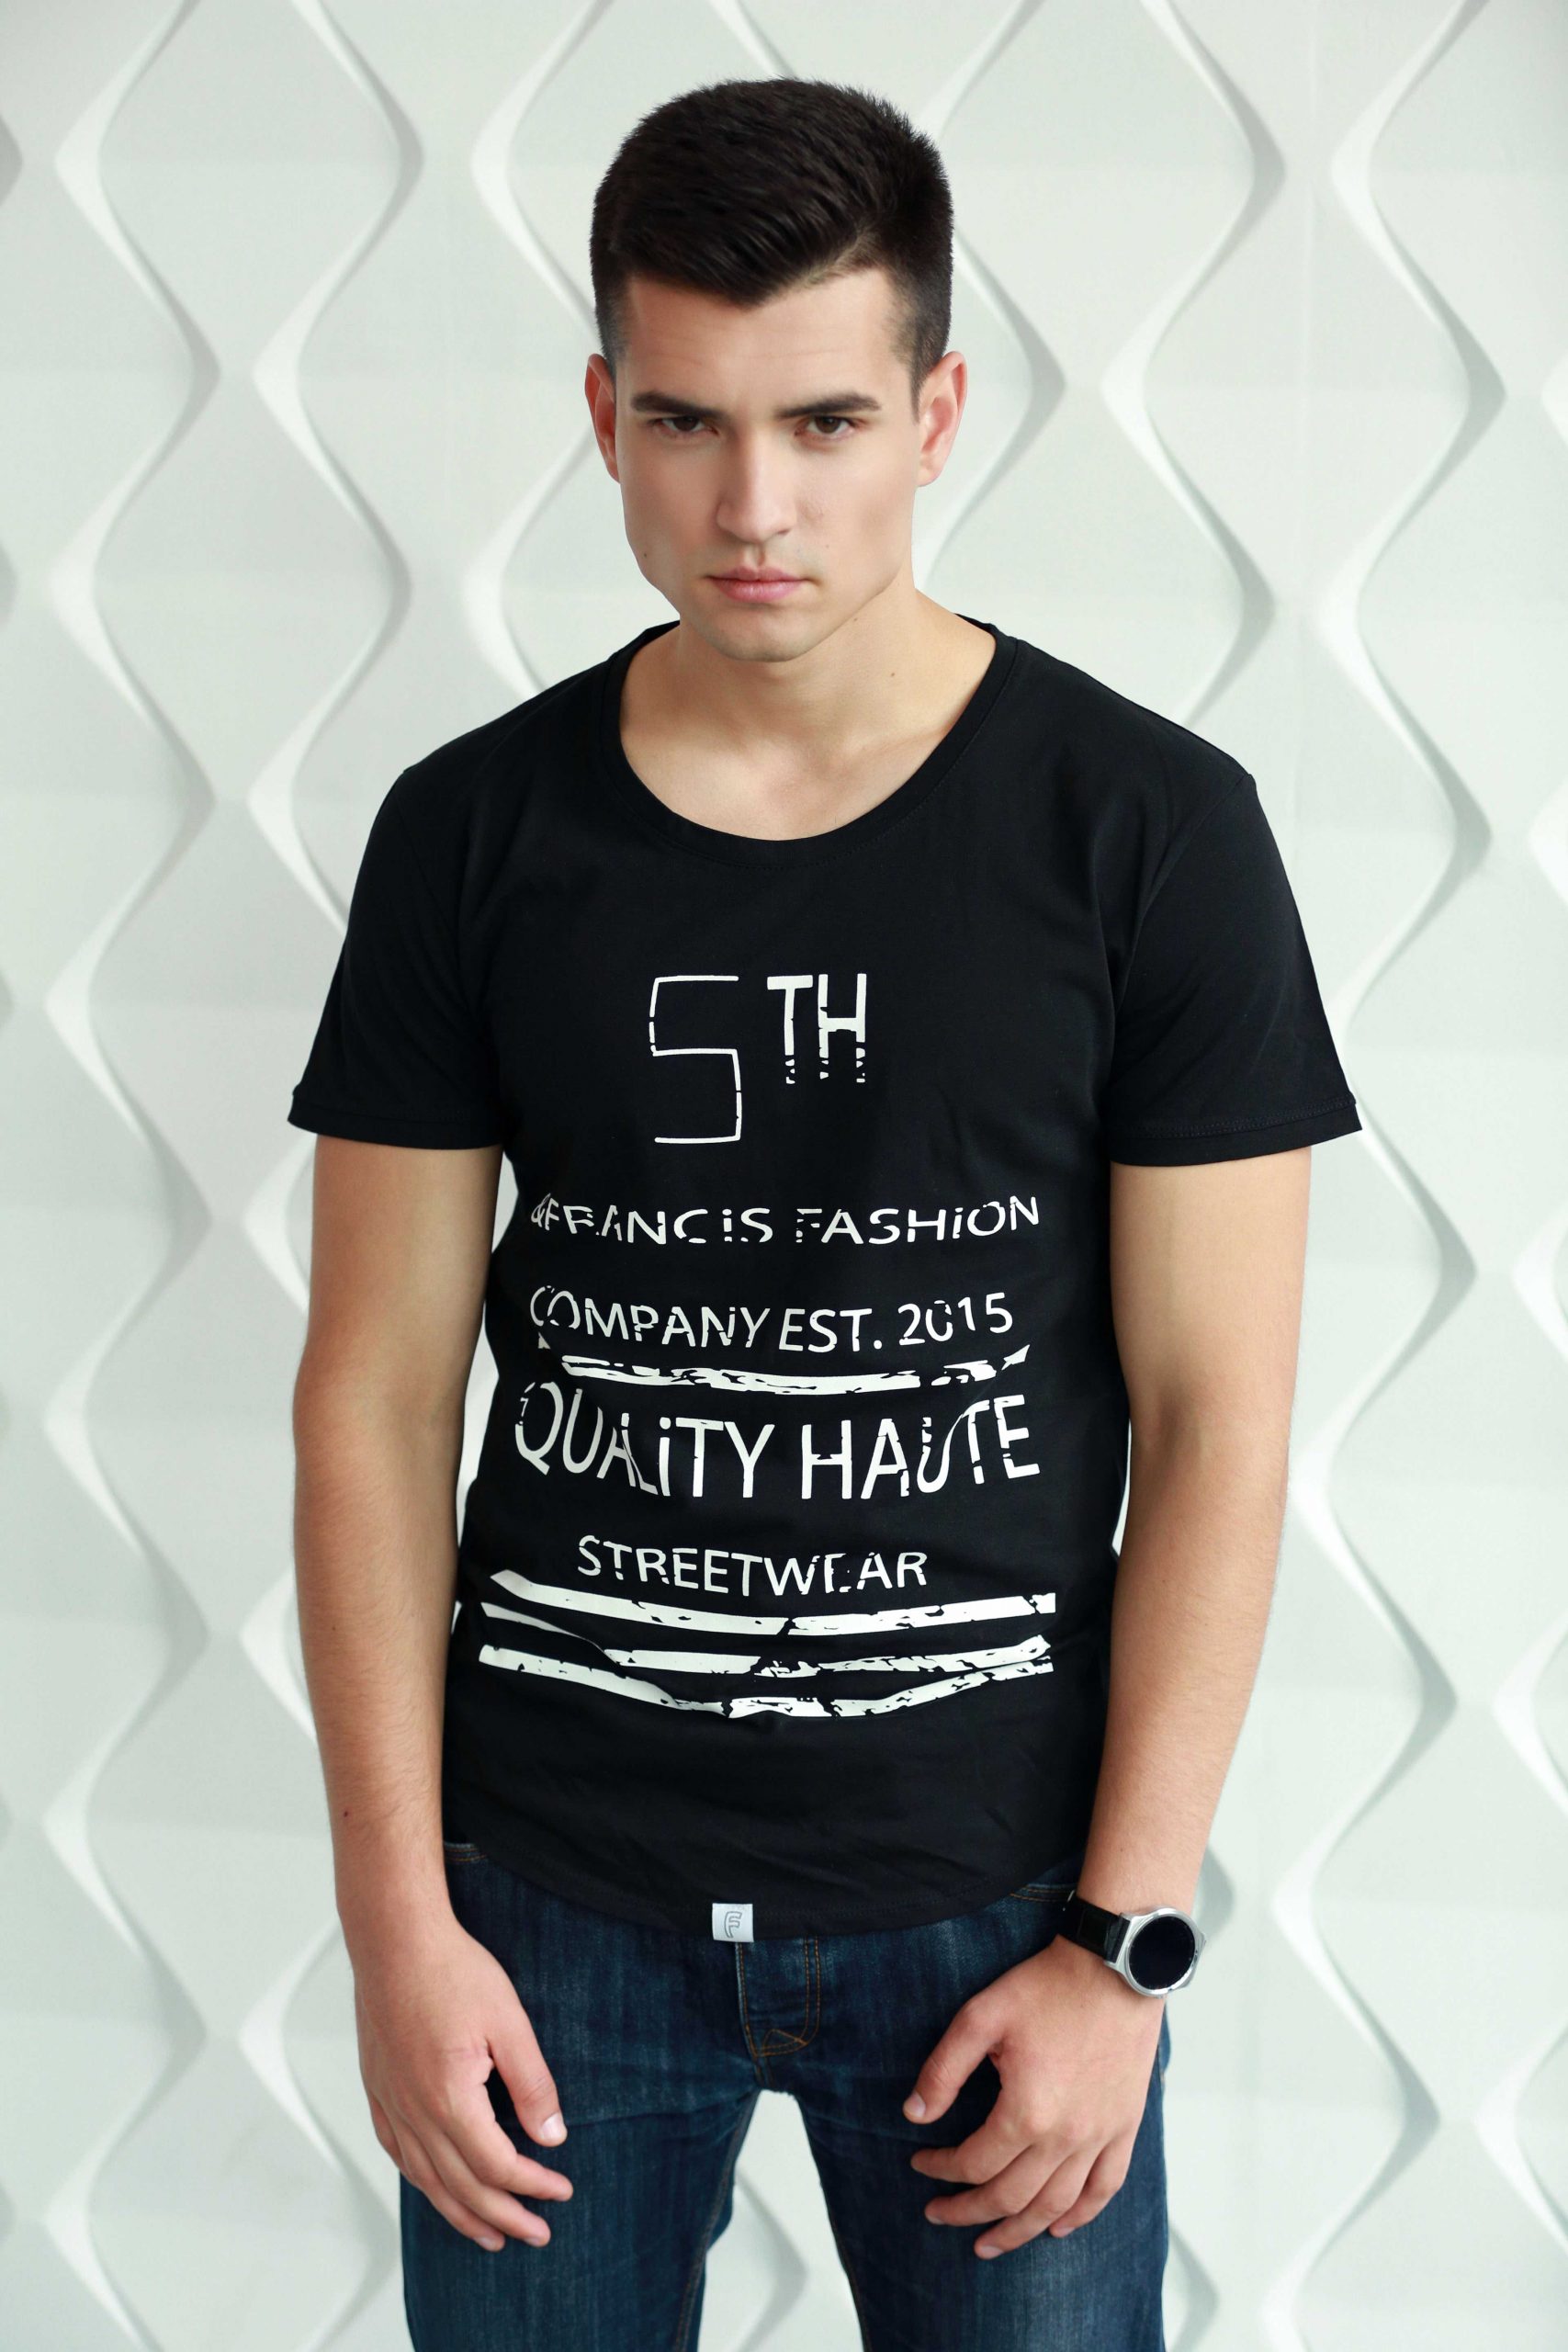 Black white T-shirt men - Fifth & Francis - casual clothing for men